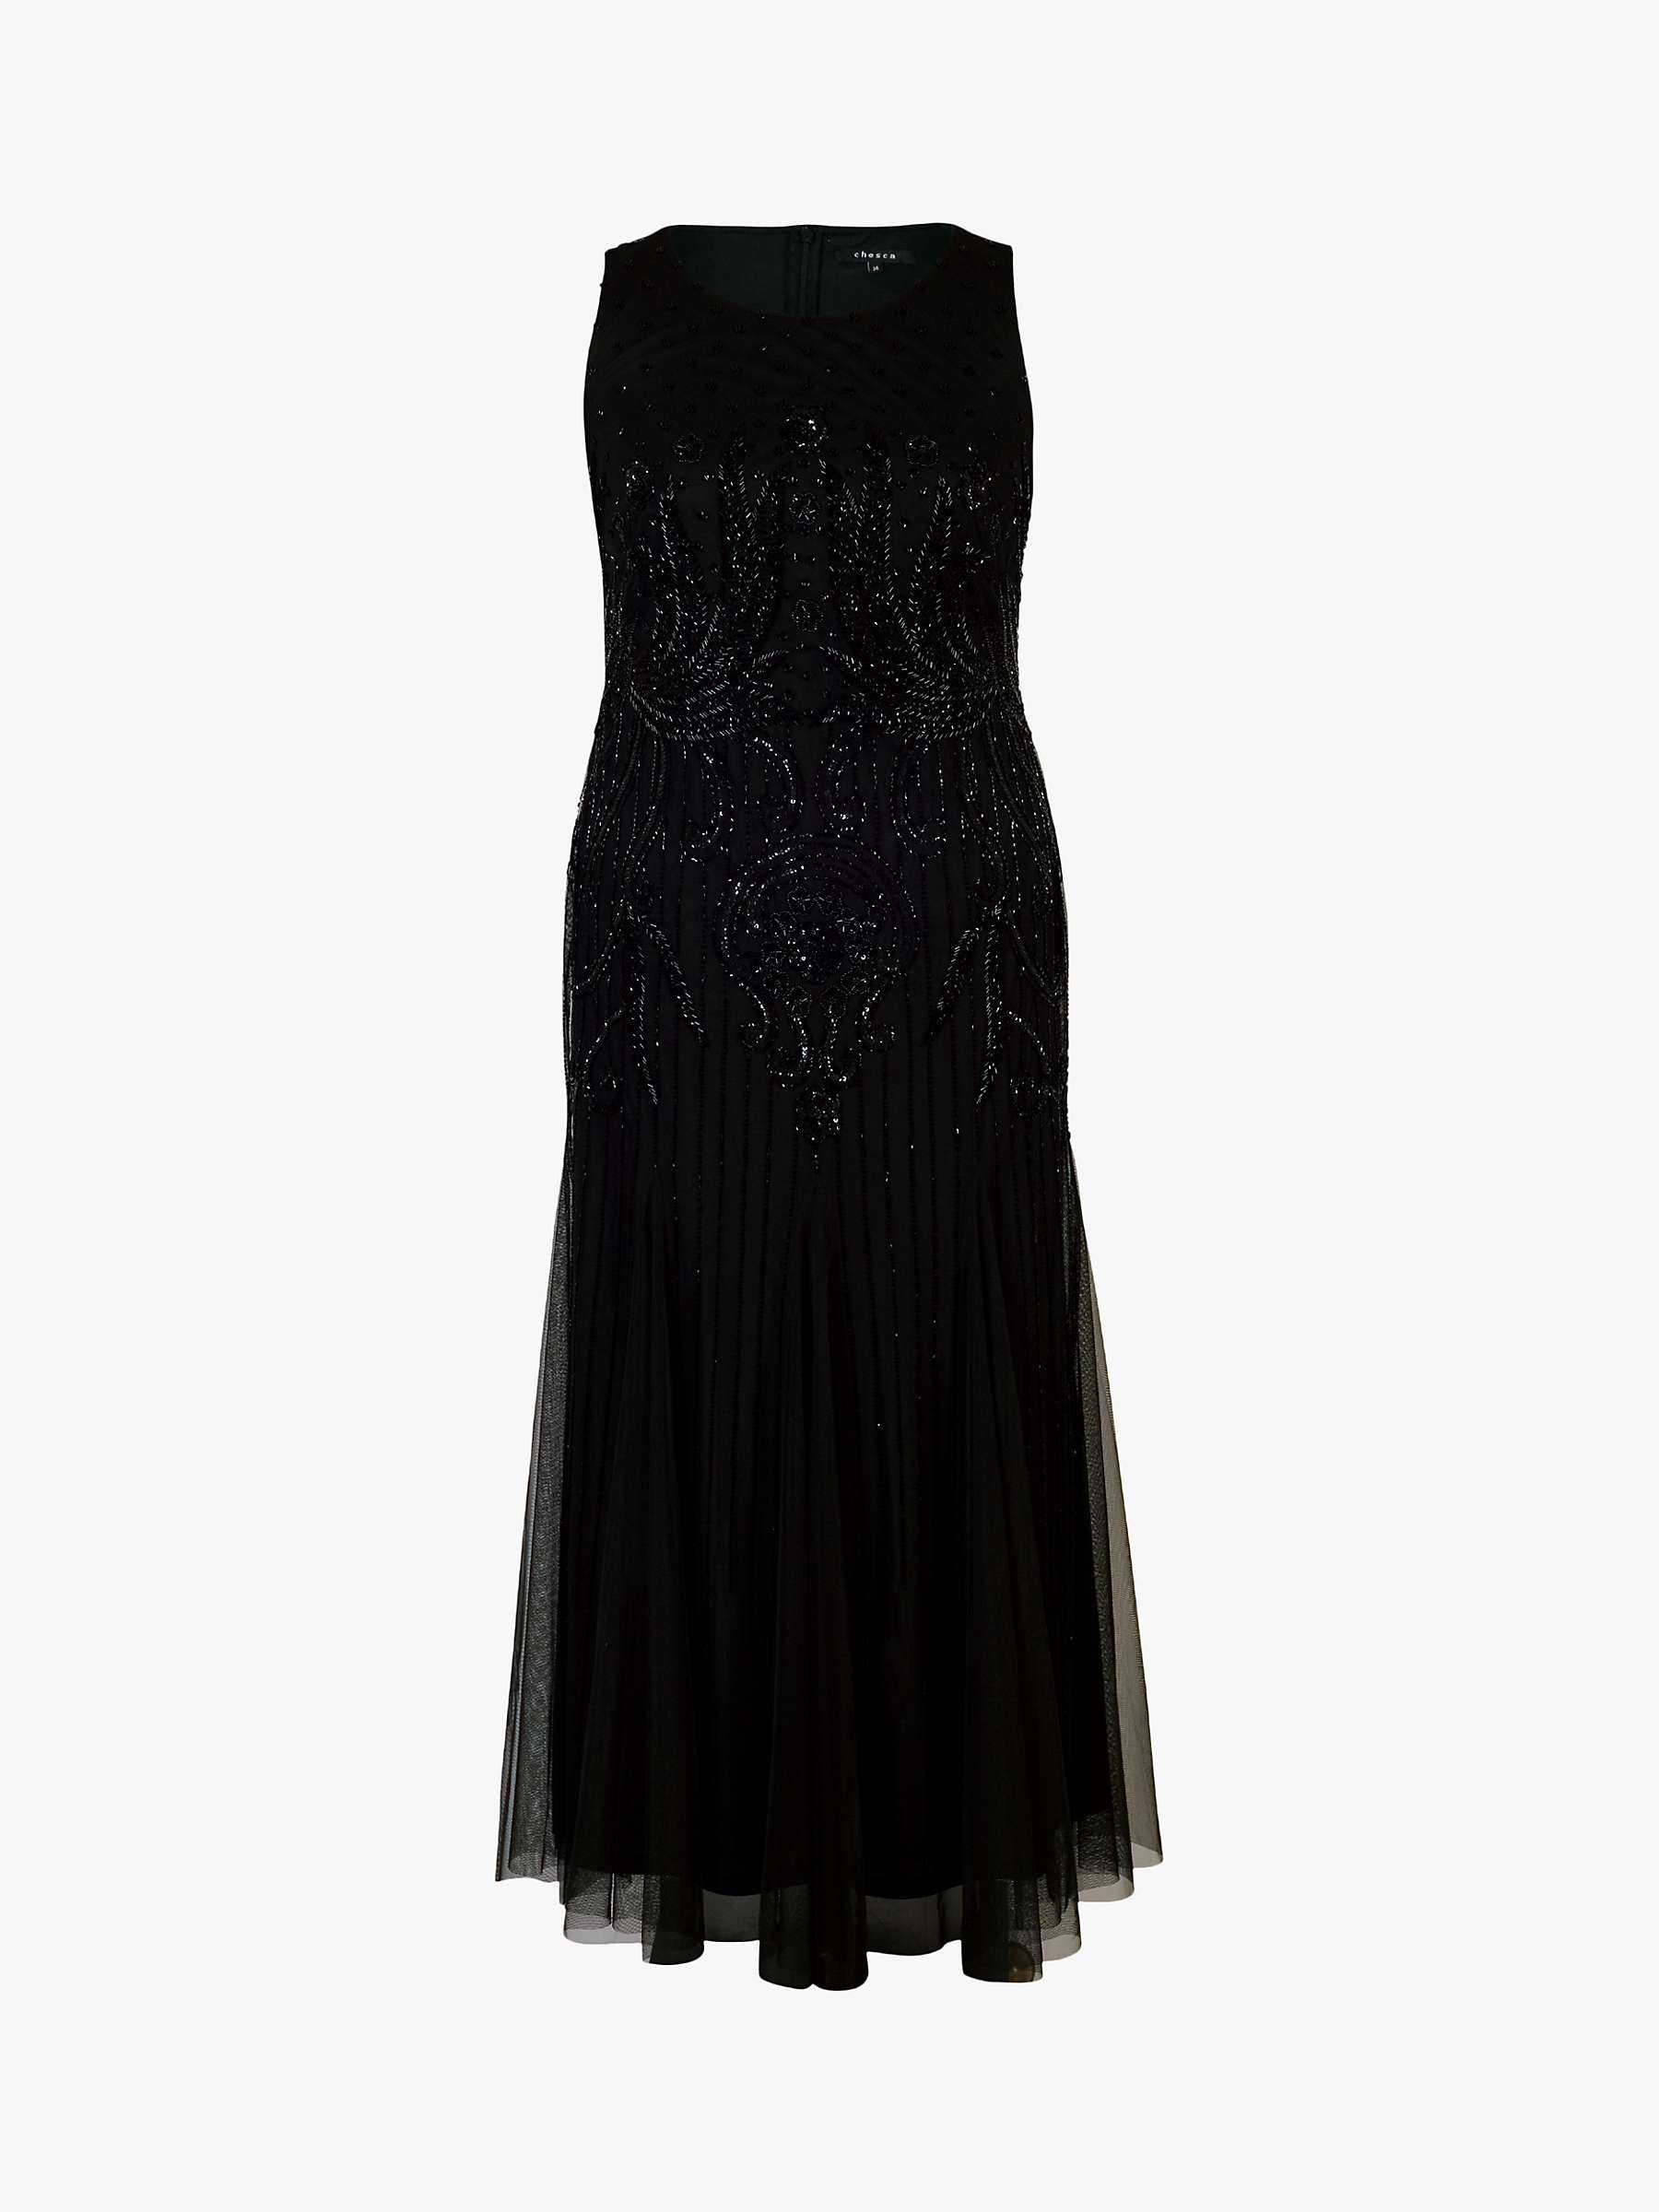 Buy chesca Sleeveless Embroidered Mesh Dress Online at johnlewis.com